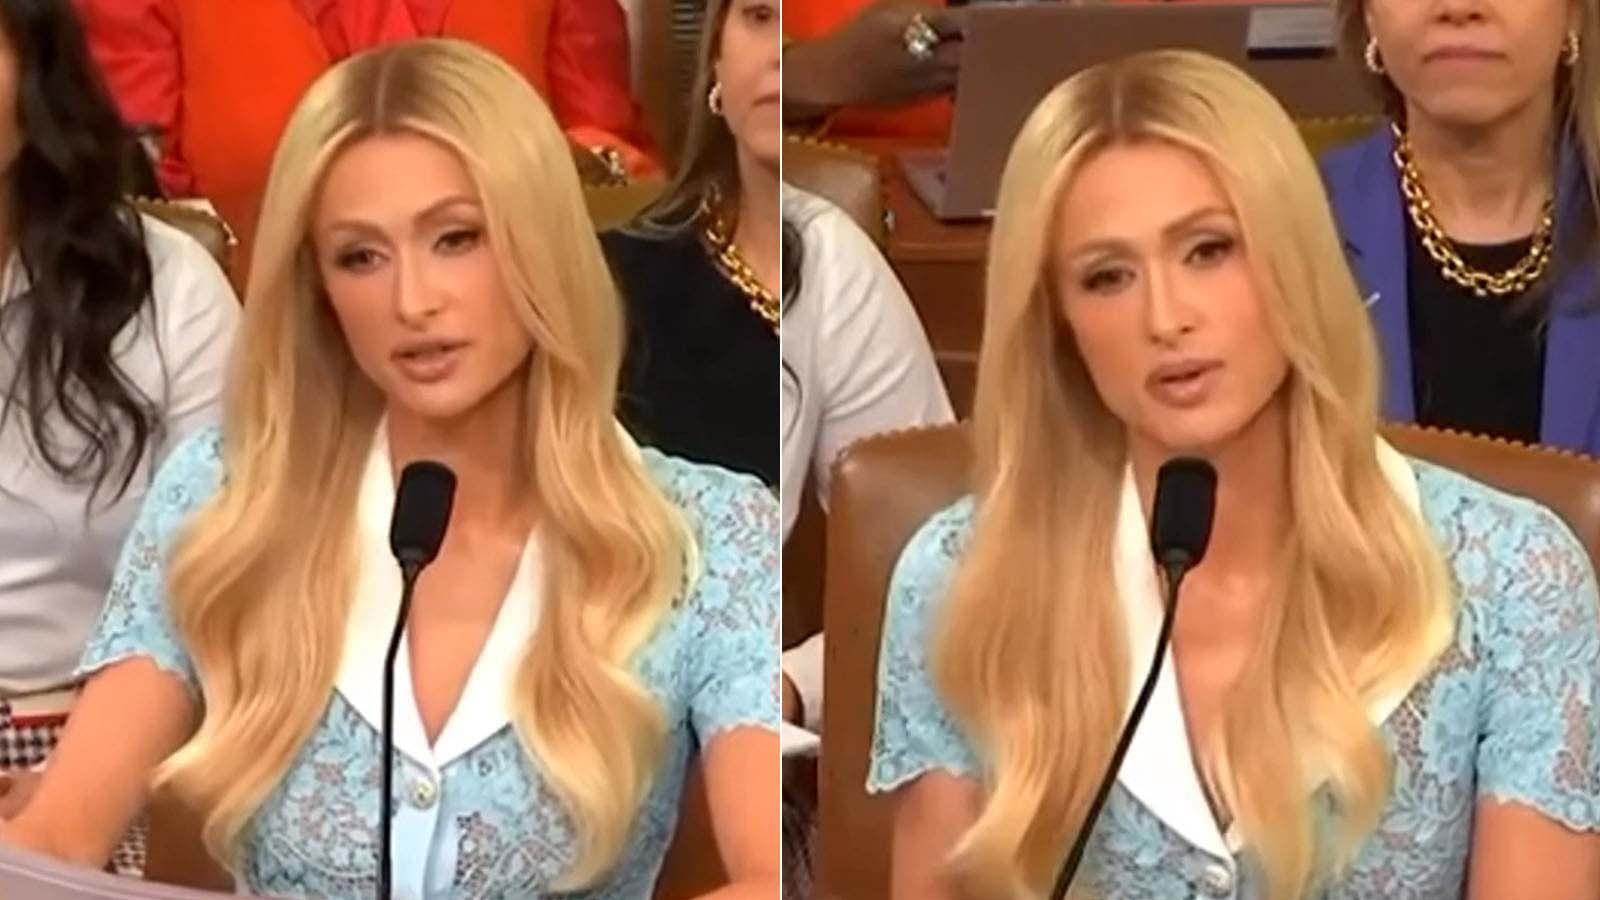 Paris Hilton opens up on childhood abuse experience, calls for safer youth facilities in U